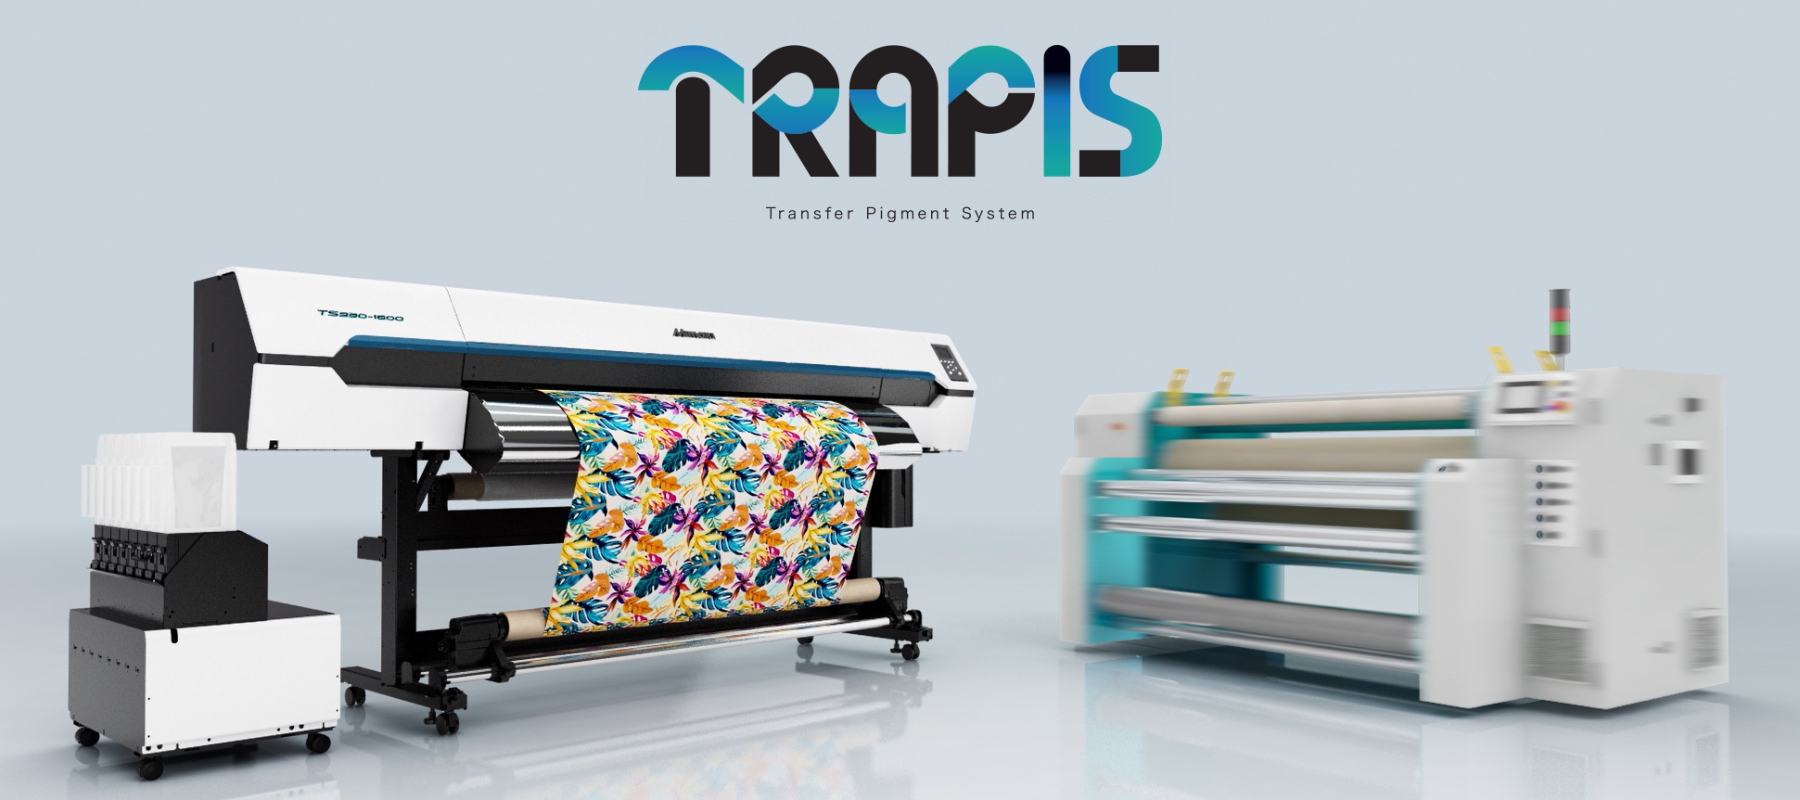 Mimaki TRAPIS system offers environmentally conscious, two step textile transfer printing solution onto multiple fabric types